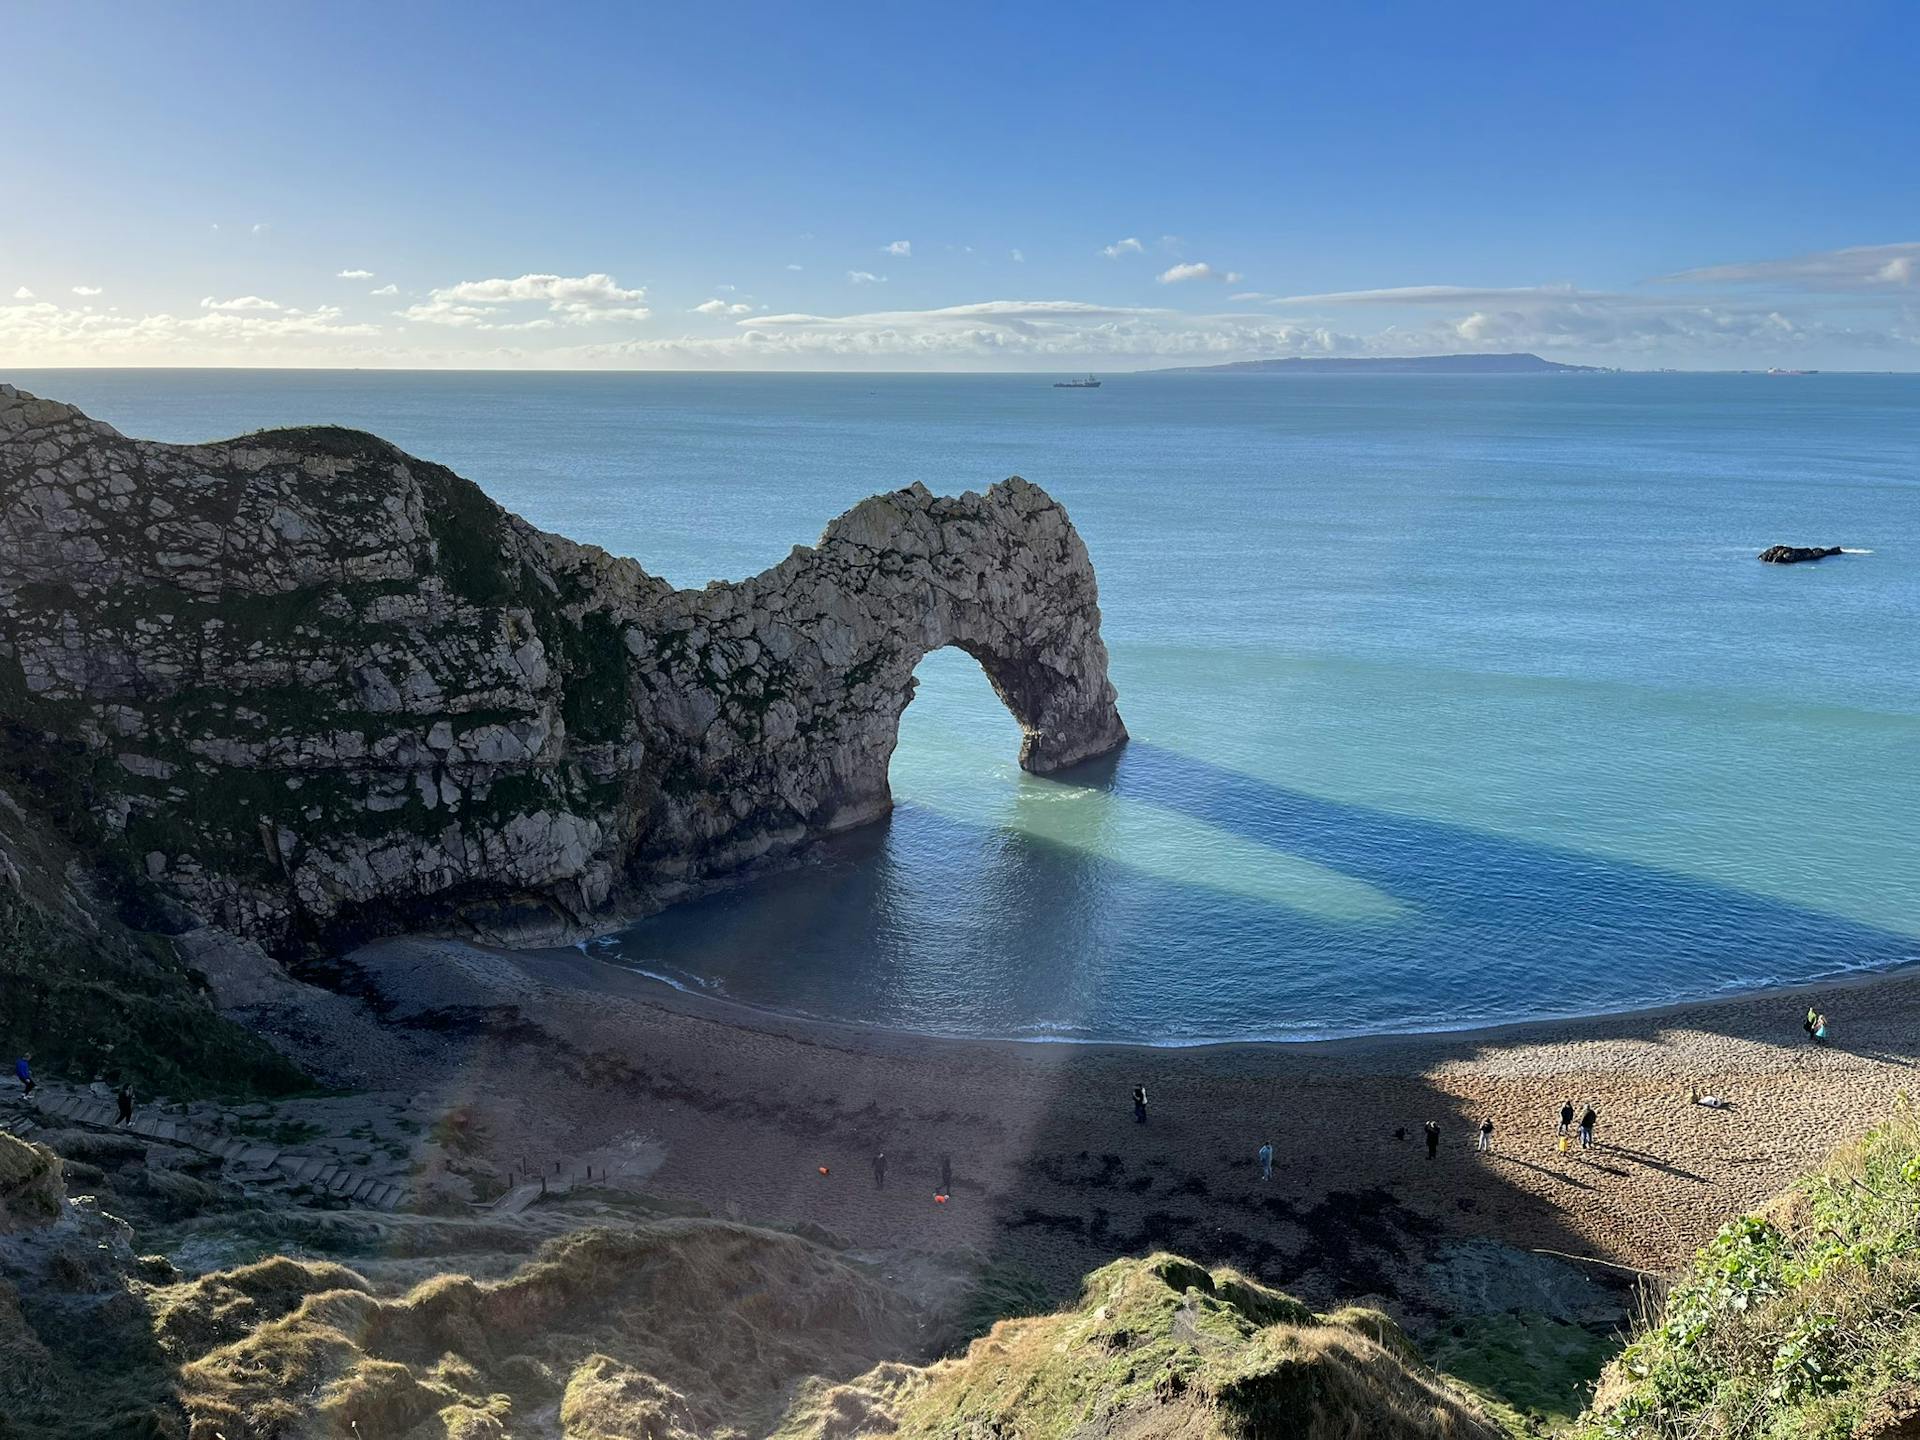 <p>The Jurassic Coast is a World Heritage Site on the English Channel coast of southern England. It stretches from Exmouth in East Devon to Studland Bay in Dorset, a distance of about 96 miles (154 km), and was inscribed on the World Heritage List in mid-December 2001.</p><p><br></p><p><u>Some of the features and highlights of the Jurassic Coast are</u></p><p><br></p><p>It showcases 185 million years of geological history, covering the Triassic, Jurassic and Cretaceous periods, and revealing how the Earth and its life forms have changed over time.</p><p><br></p><p>It is famous for its fossils, which include marine reptiles, ammonites, dinosaurs, plants and insects. Some of the most notable fossil collectors and palaeontologists, such as Mary Anning, William Buckland and Richard Owen, made important discoveries here.</p><p><br></p><p>It has diverse and spectacular landscapes, such as arches, stacks, coves, lagoons, cliffs, beaches and islands. Some of the most iconic landmarks are Durdle Door, Lulworth Cove, Chesil Beach, Portland Bill, Golden Cap and Old Harry Rocks.</p><p><br></p><p>It offers a range of outdoor activities and wildlife experiences, such as walking, cycling, kayaking, sailing, fishing, birdwatching, rock pooling and stargazing. It is home to many rare and protected species, such as the Adonis blue butterfly, the sand lizard, the little tern and the peregrine falcon.</p><p><br></p><p>It has a rich cultural and historical heritage, with many attractions, events and festivals that celebrate its natural and human stories. Some of the places to visit are Lyme Regis Museum, Charmouth Heritage Coast Centre, Durlston Country Park, Lulworth Castle and Corfe Castle.</p><p><br></p>